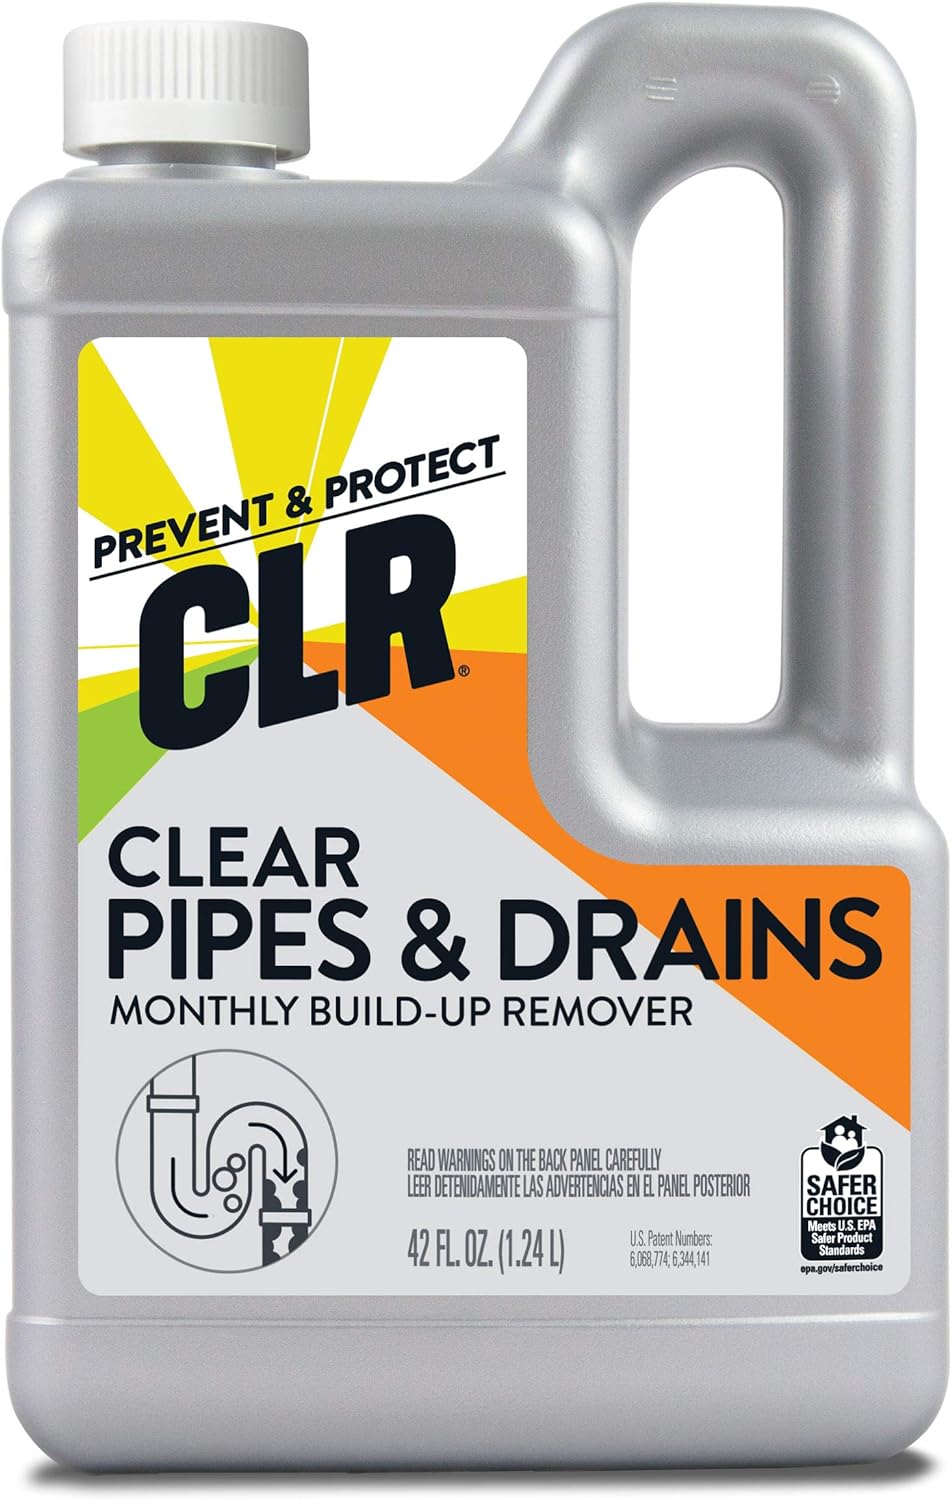 CLR Clear Pipes & Drains Clog Remover